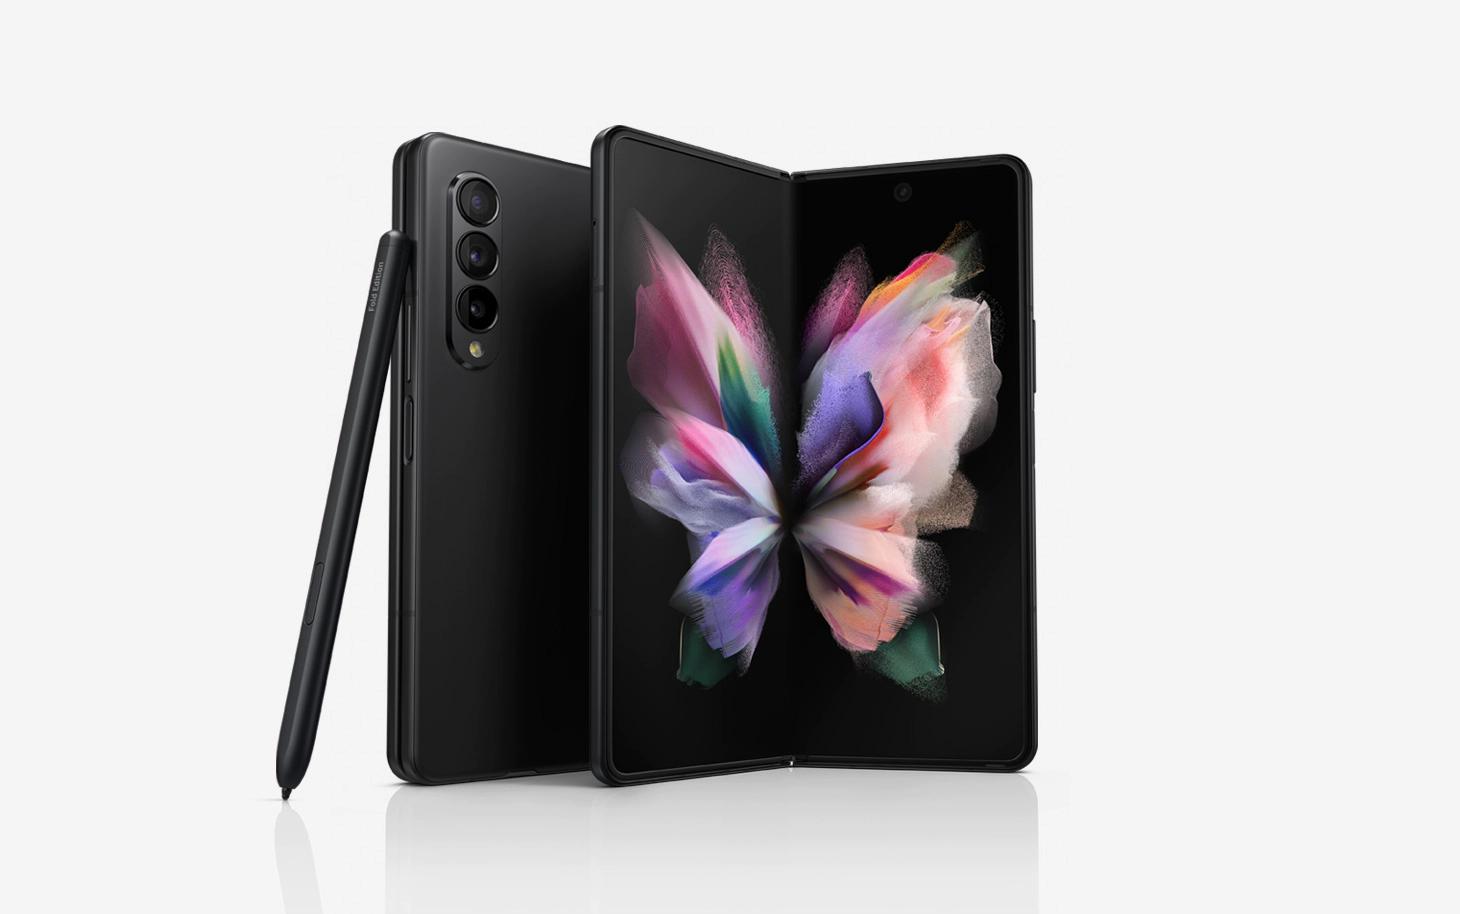 The Galaxy Z Fold 3 is successful thanks to its foldable screen